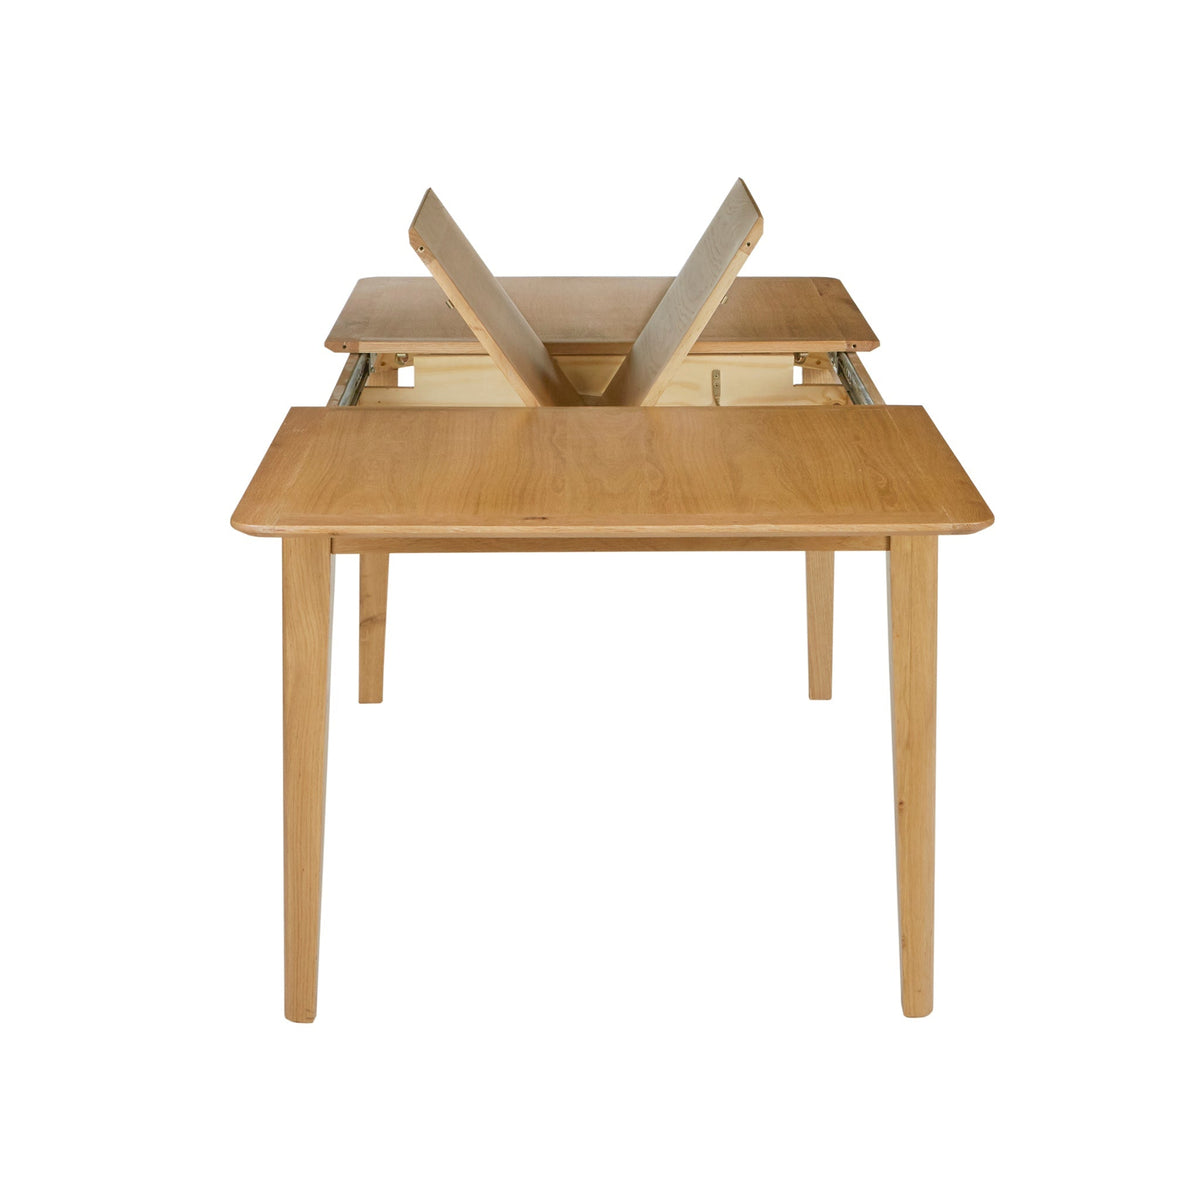 Alba Oak 150-200cm Extending Table - With extension section opening